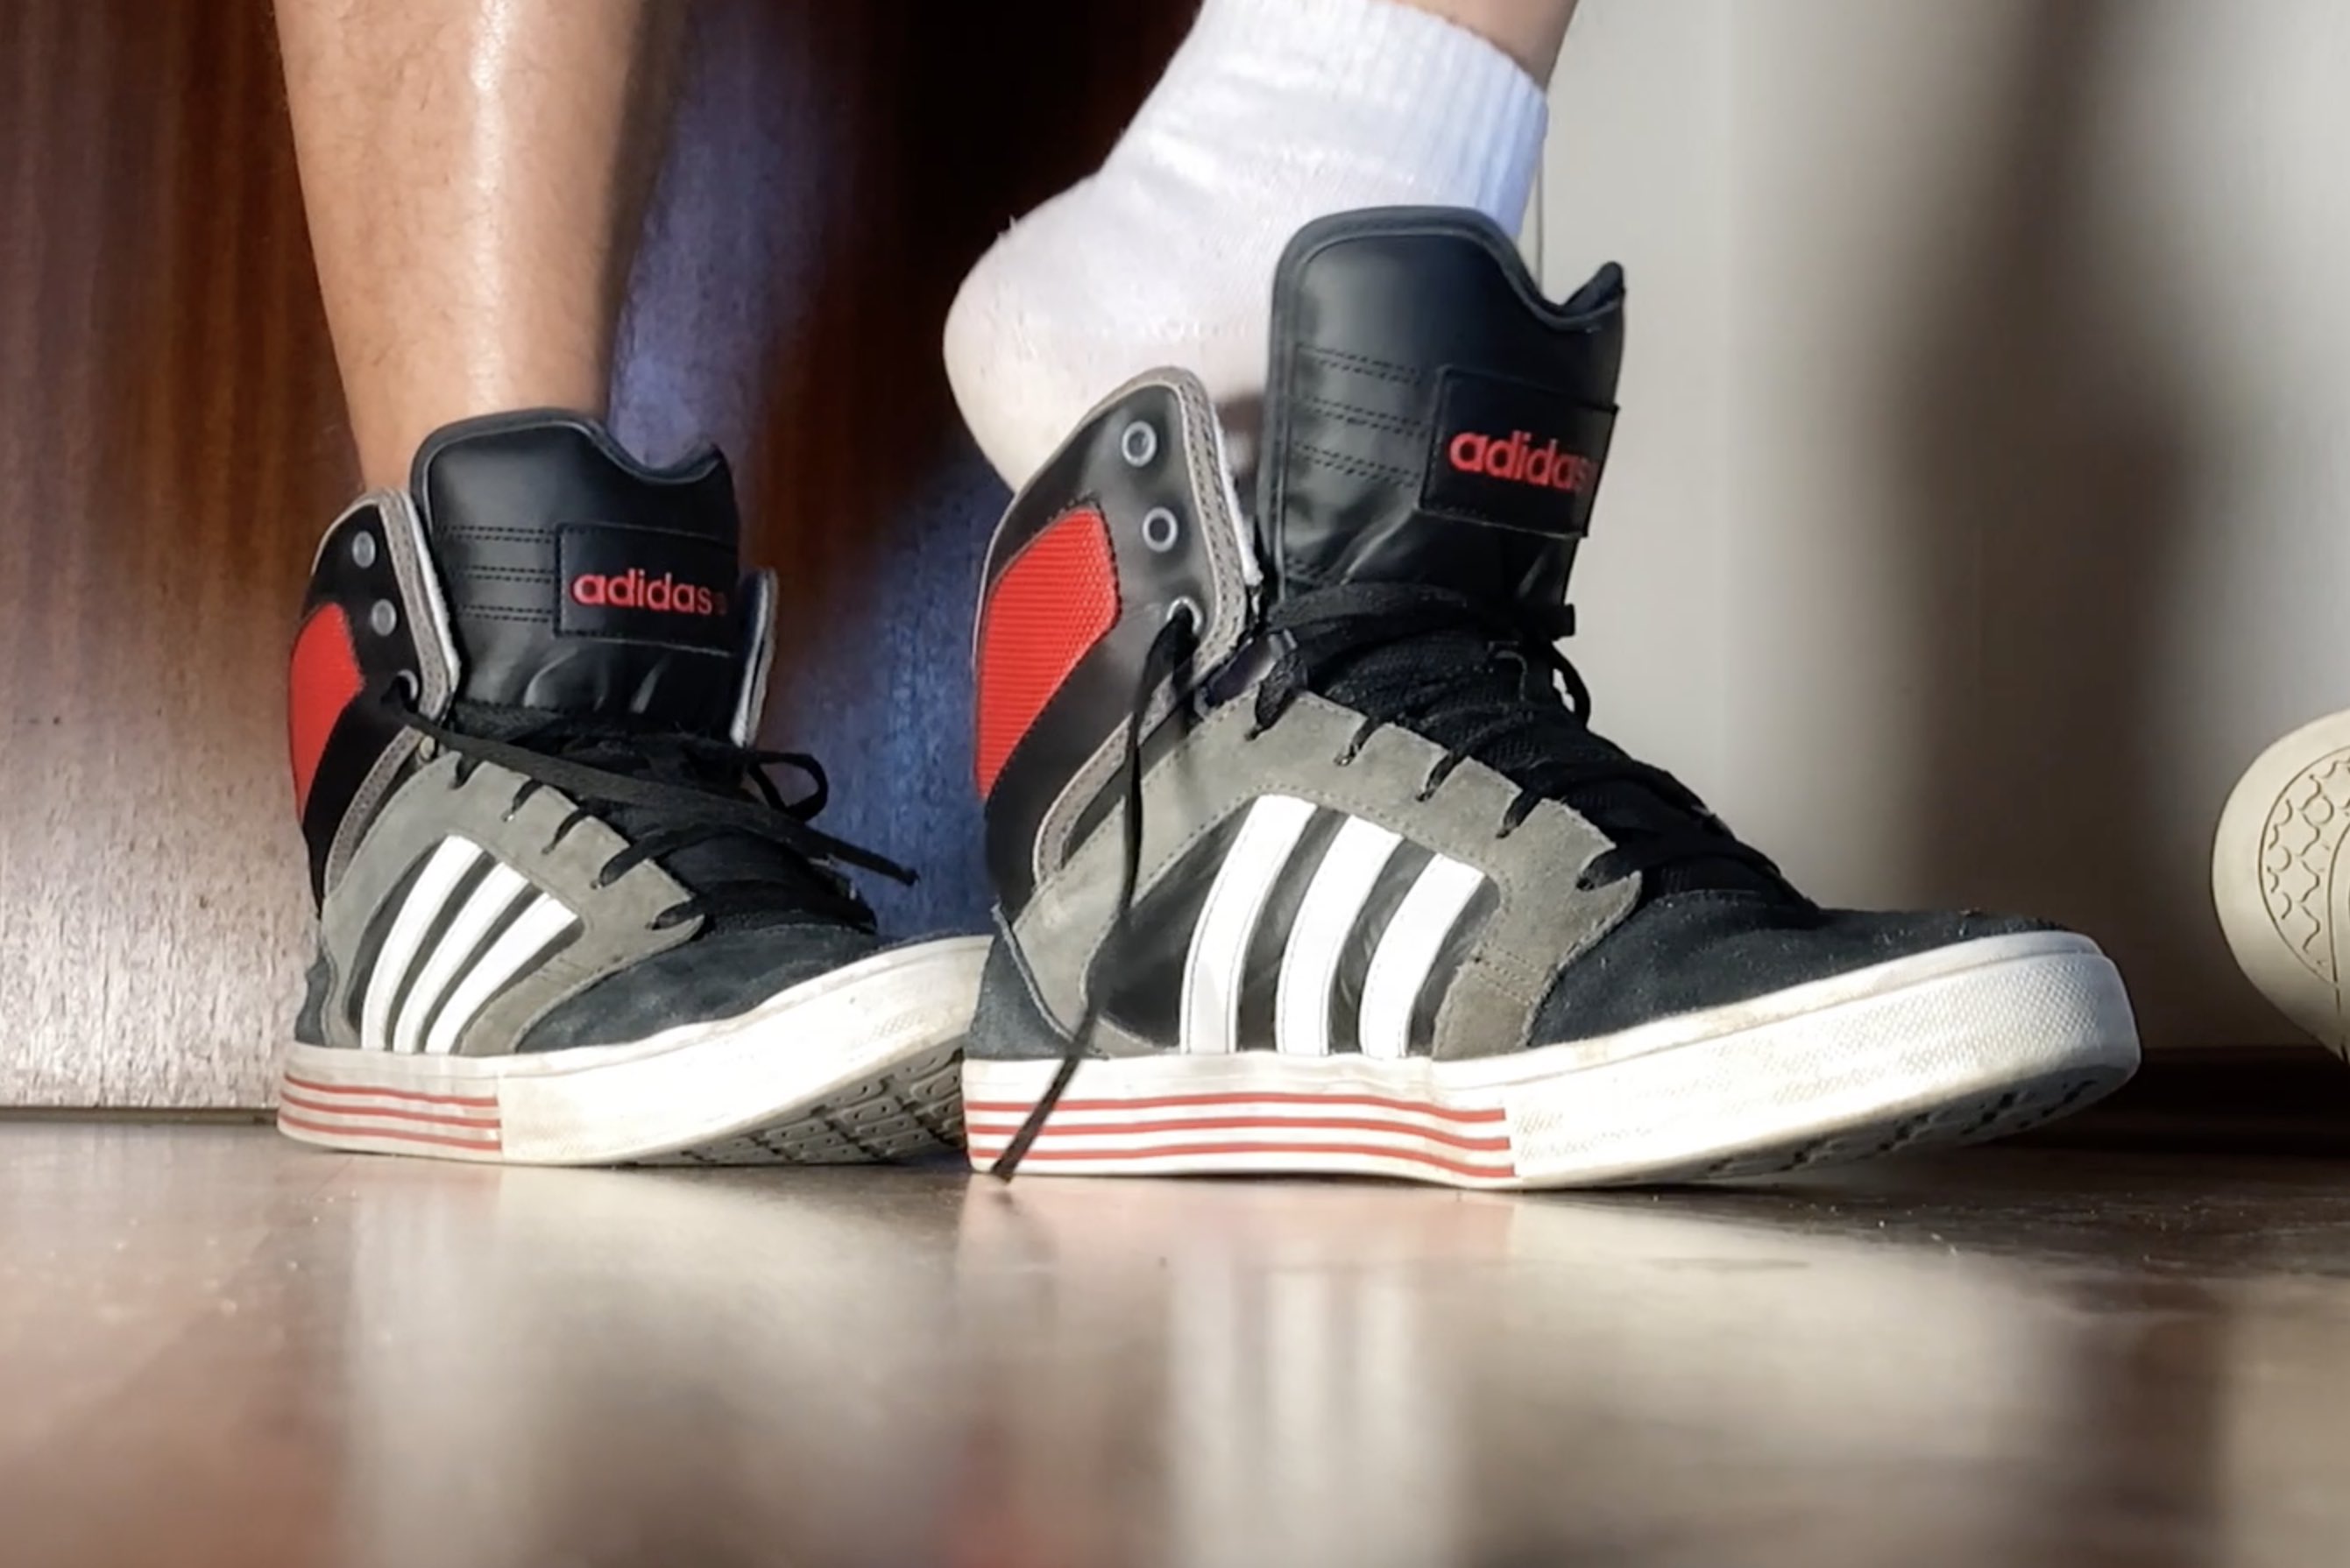 undressing my adidas - bugview -